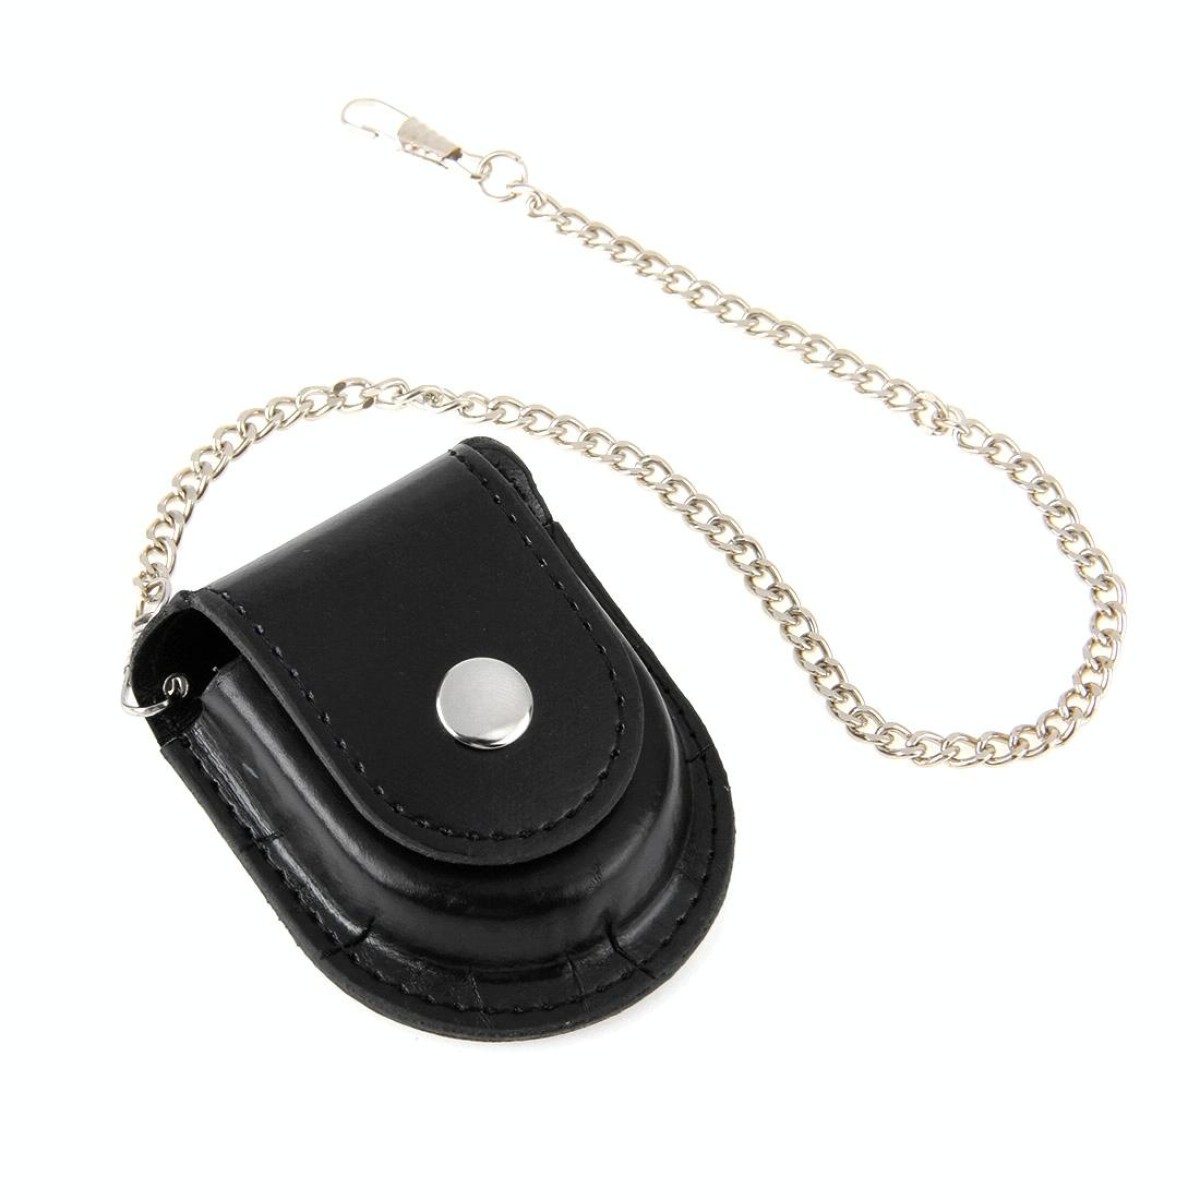 Retro Pocket Watch Holster / Leather Pouch / Belt Bag with Chain